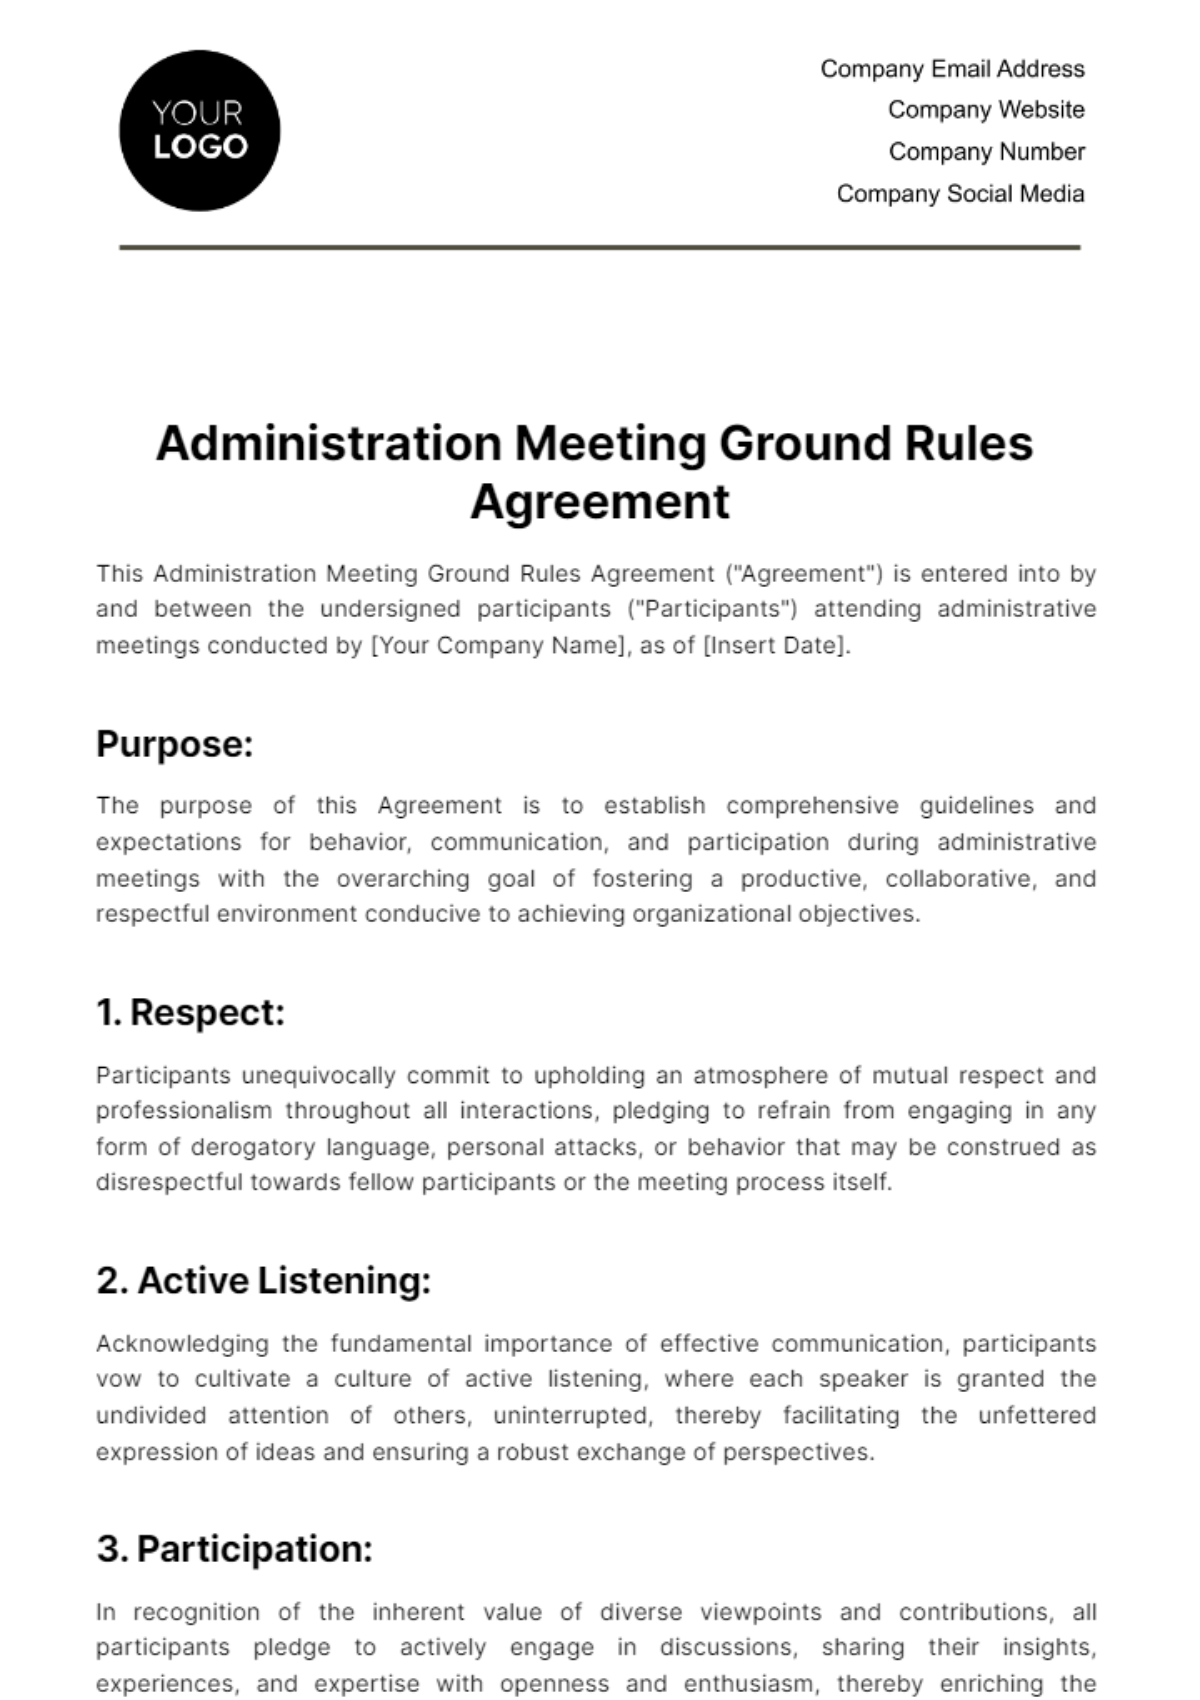 Administration Meeting Ground Rules Agreement Template